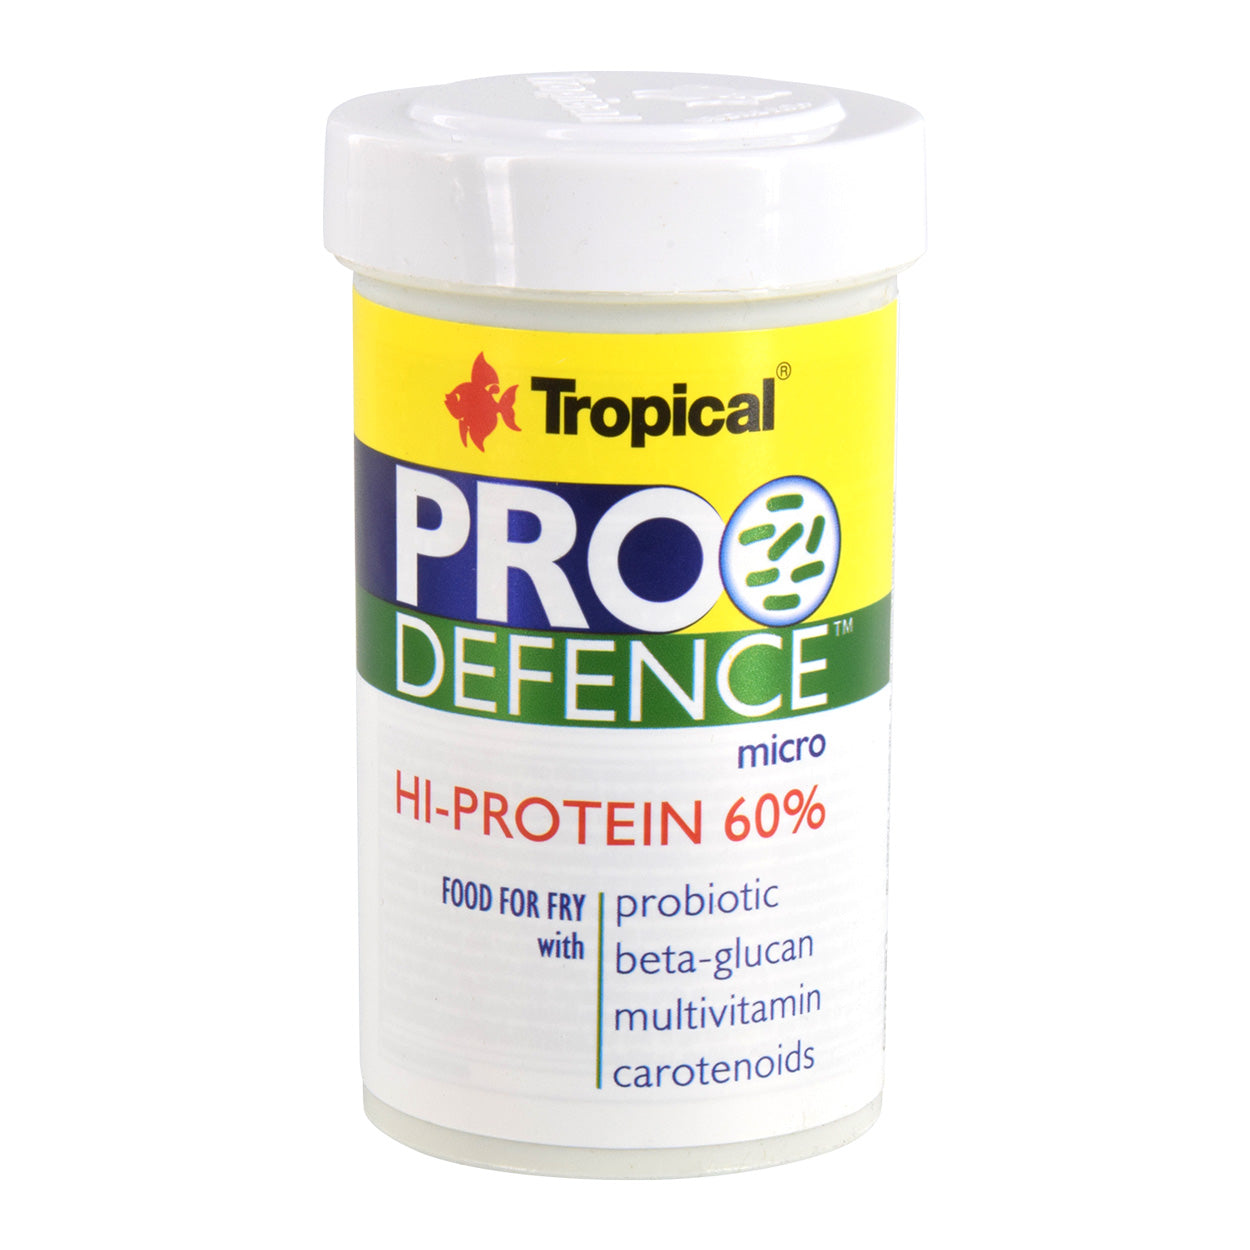 Tropical Pro Defence 60g